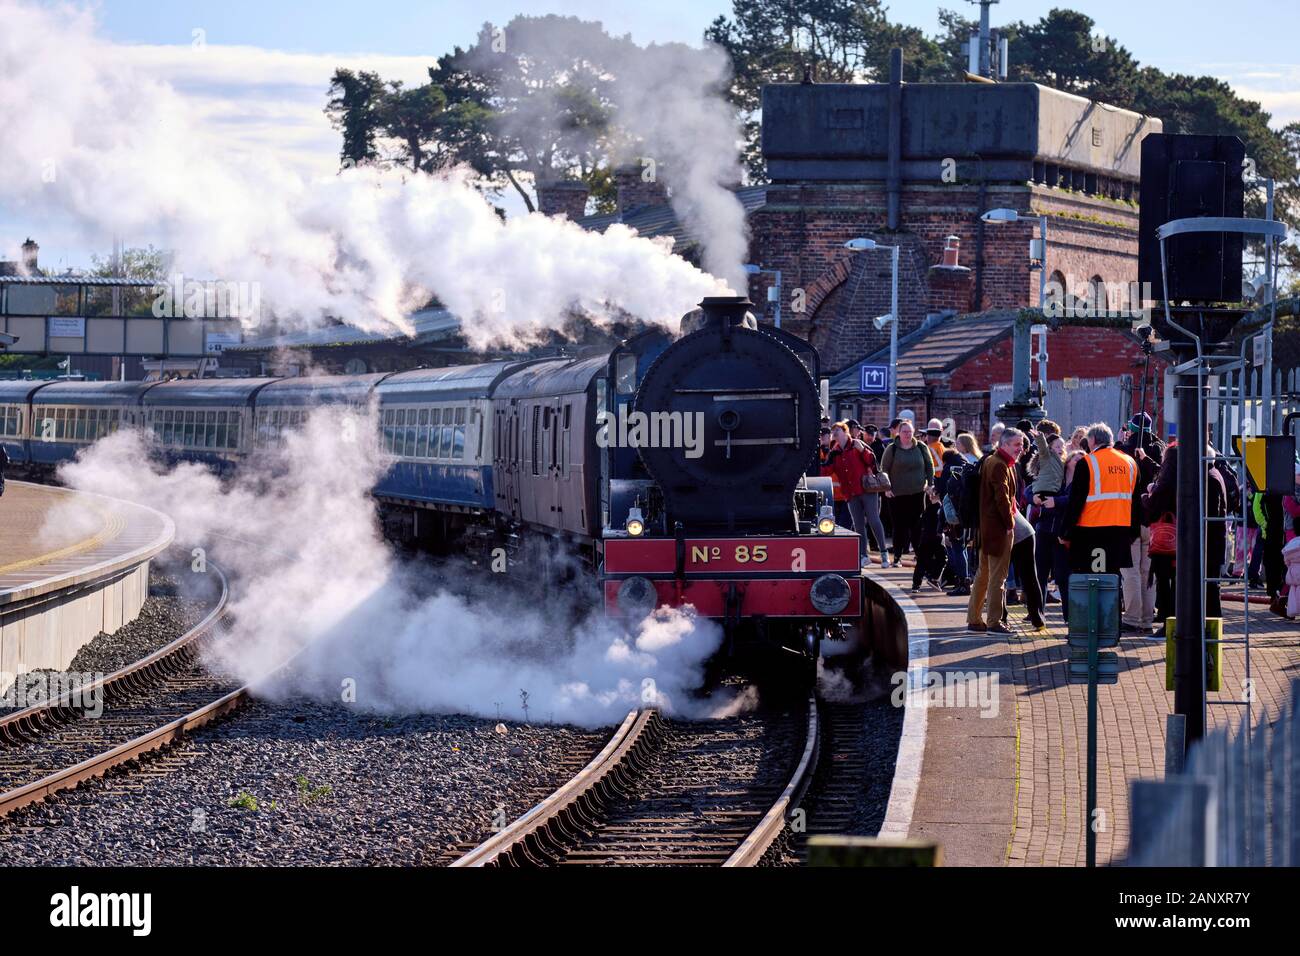 NO 85 Merlin Steam train at Platform in Drogheda station, with crowd waiting to board Stock Photo